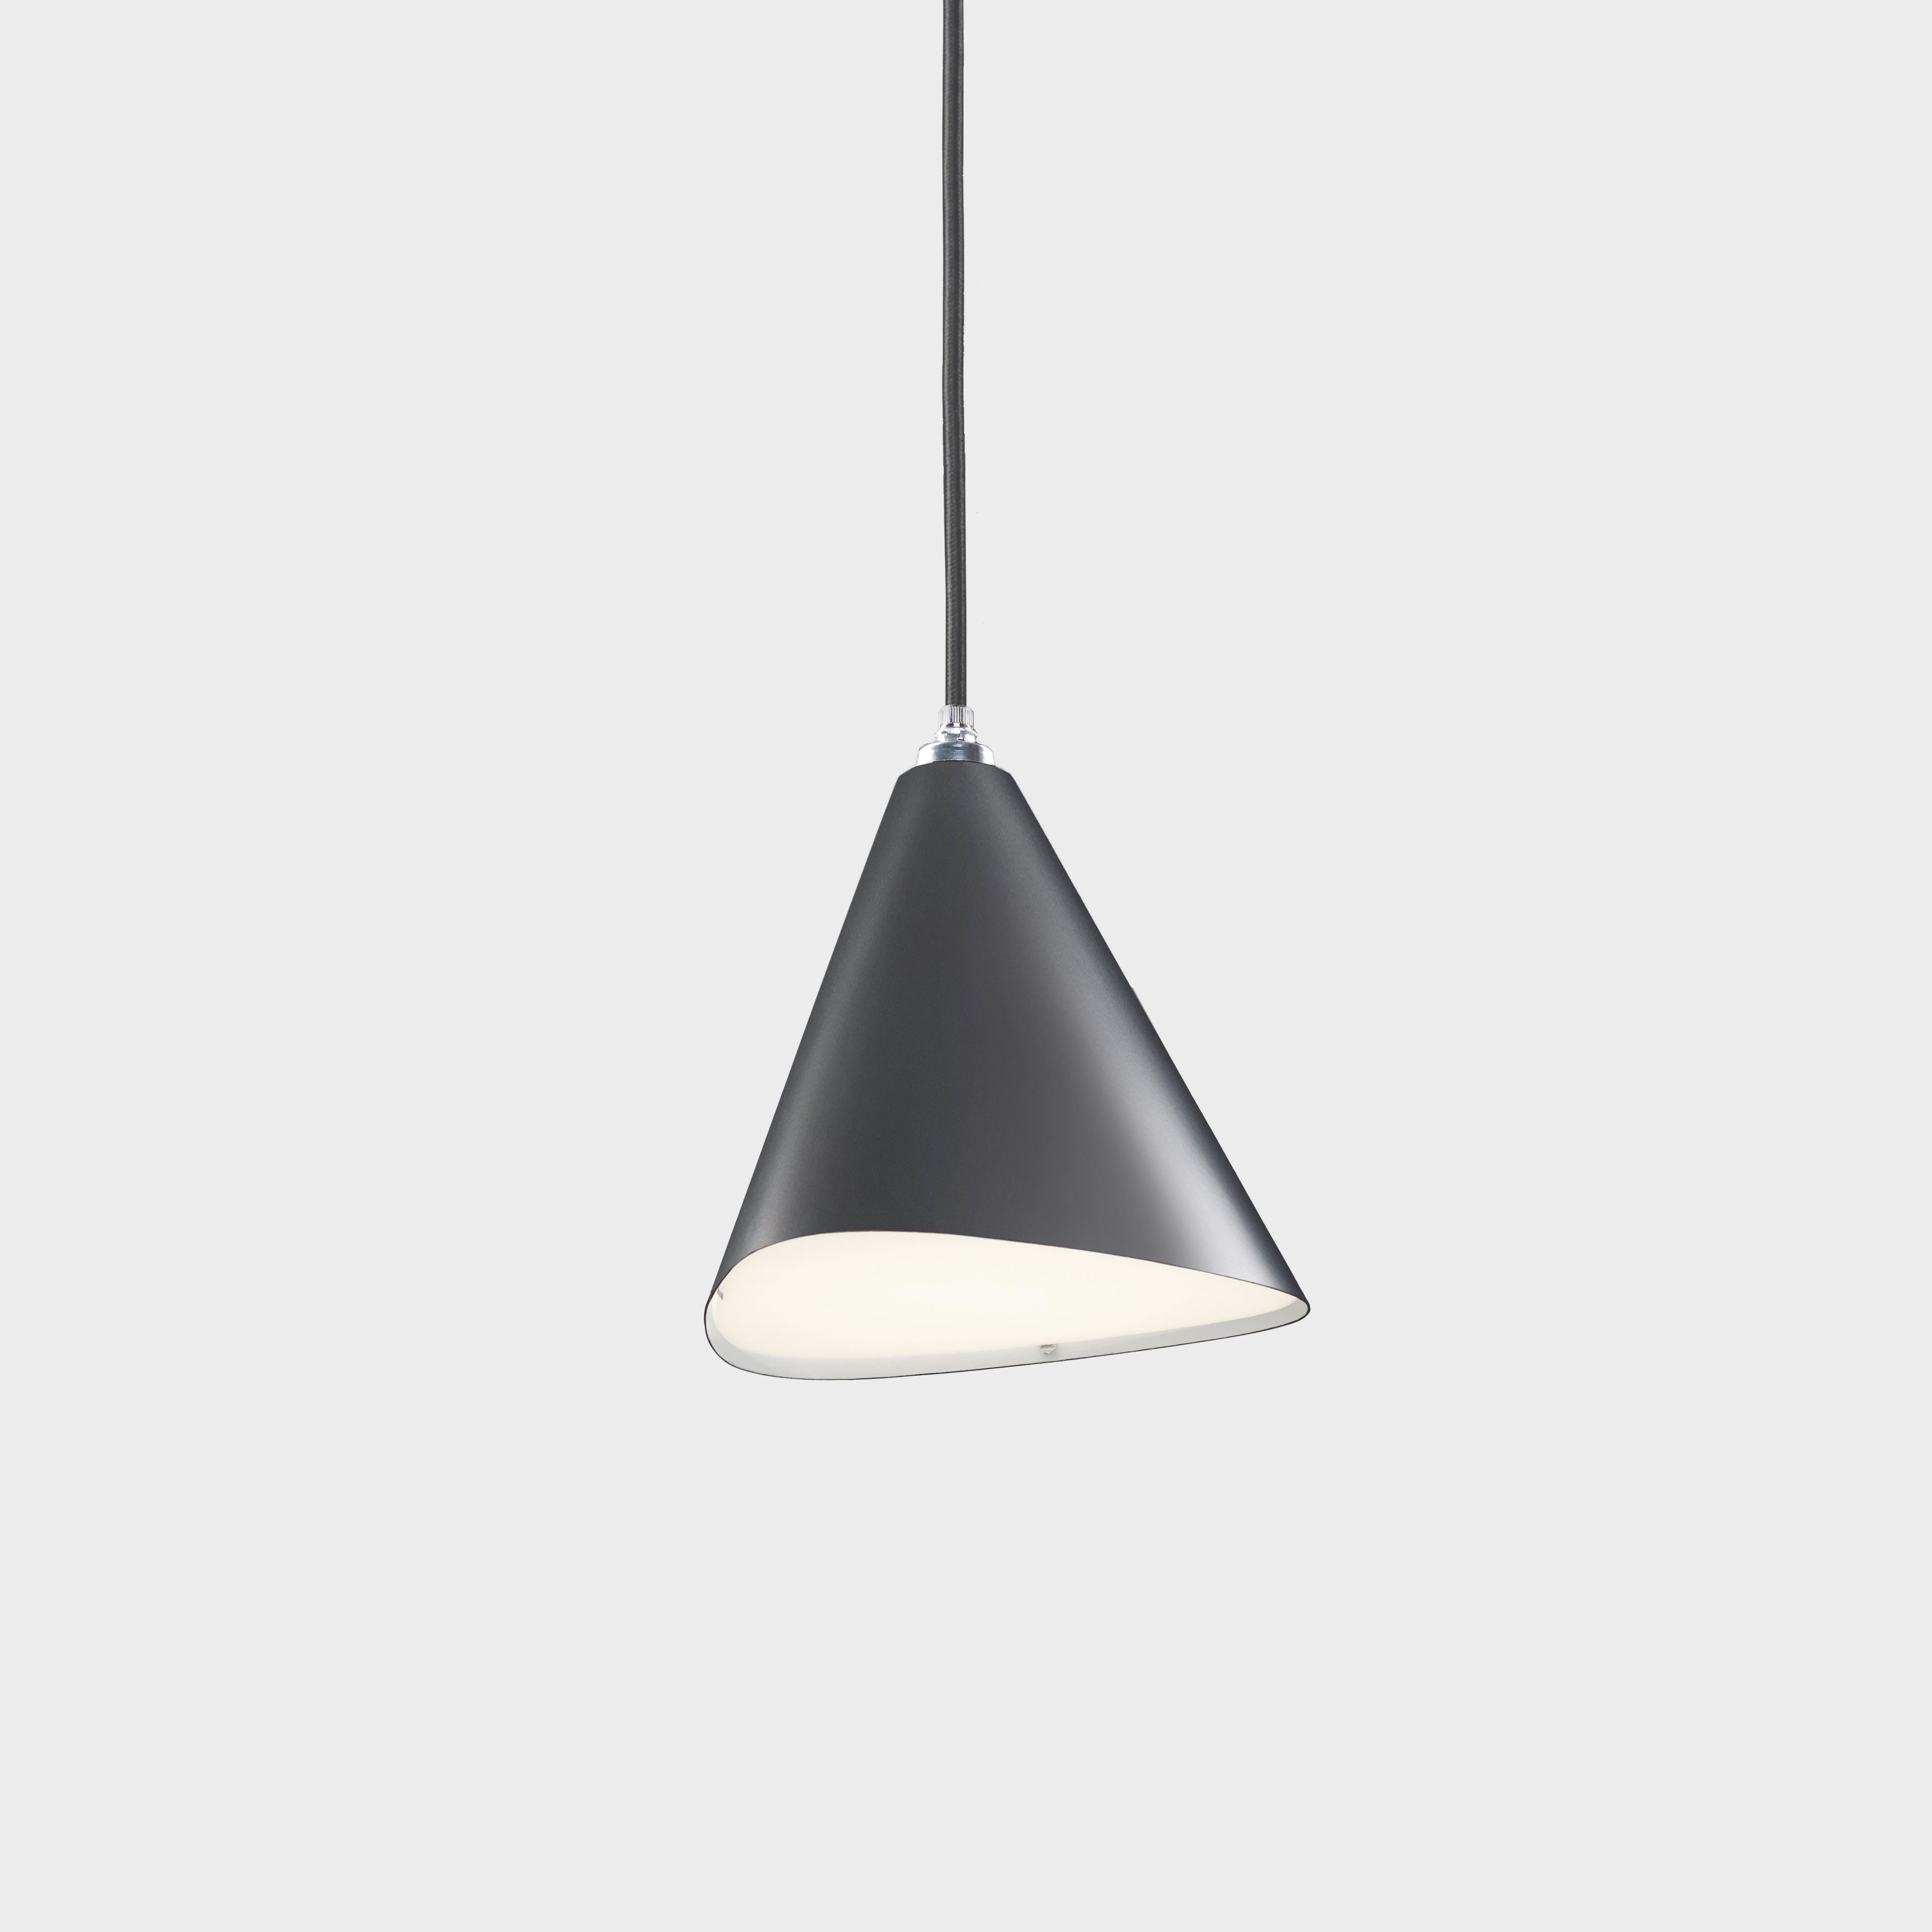 Daniel Becker 'Emily III' pendant lamp in anthracite for Moss Objects. Designed by Berlin luminary Daniel Becker and handmade to order using mid-century manufacturing techniques. Executed in high-quality sheet metal with up to ten layers glossy or